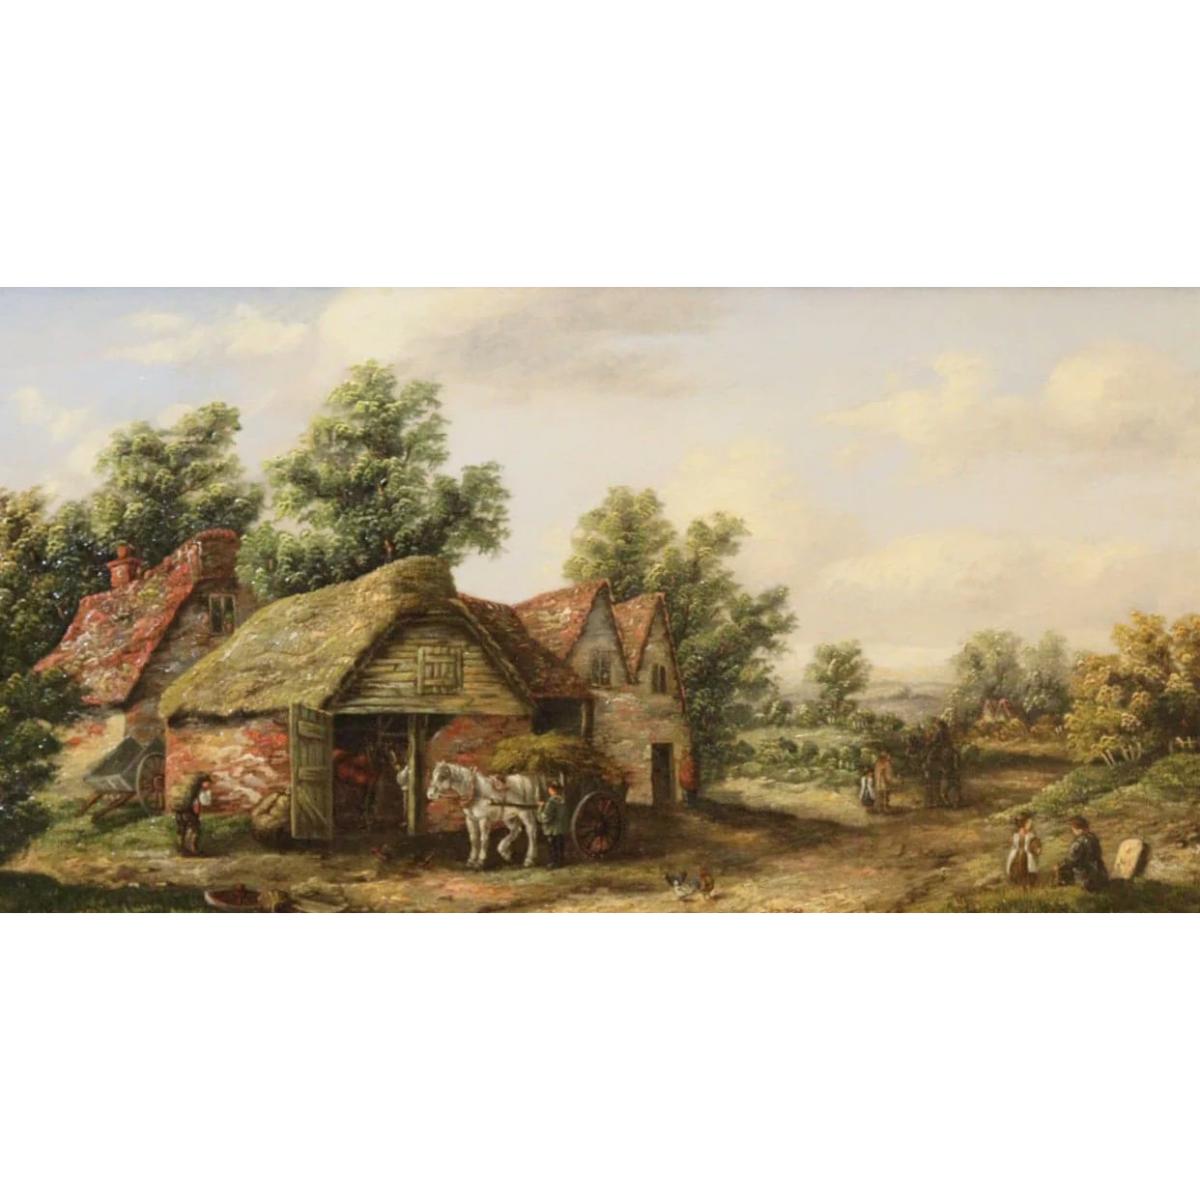 19th Century Oil on Canvas Painting entitled "A Village in Sussex" by Georgina Lara